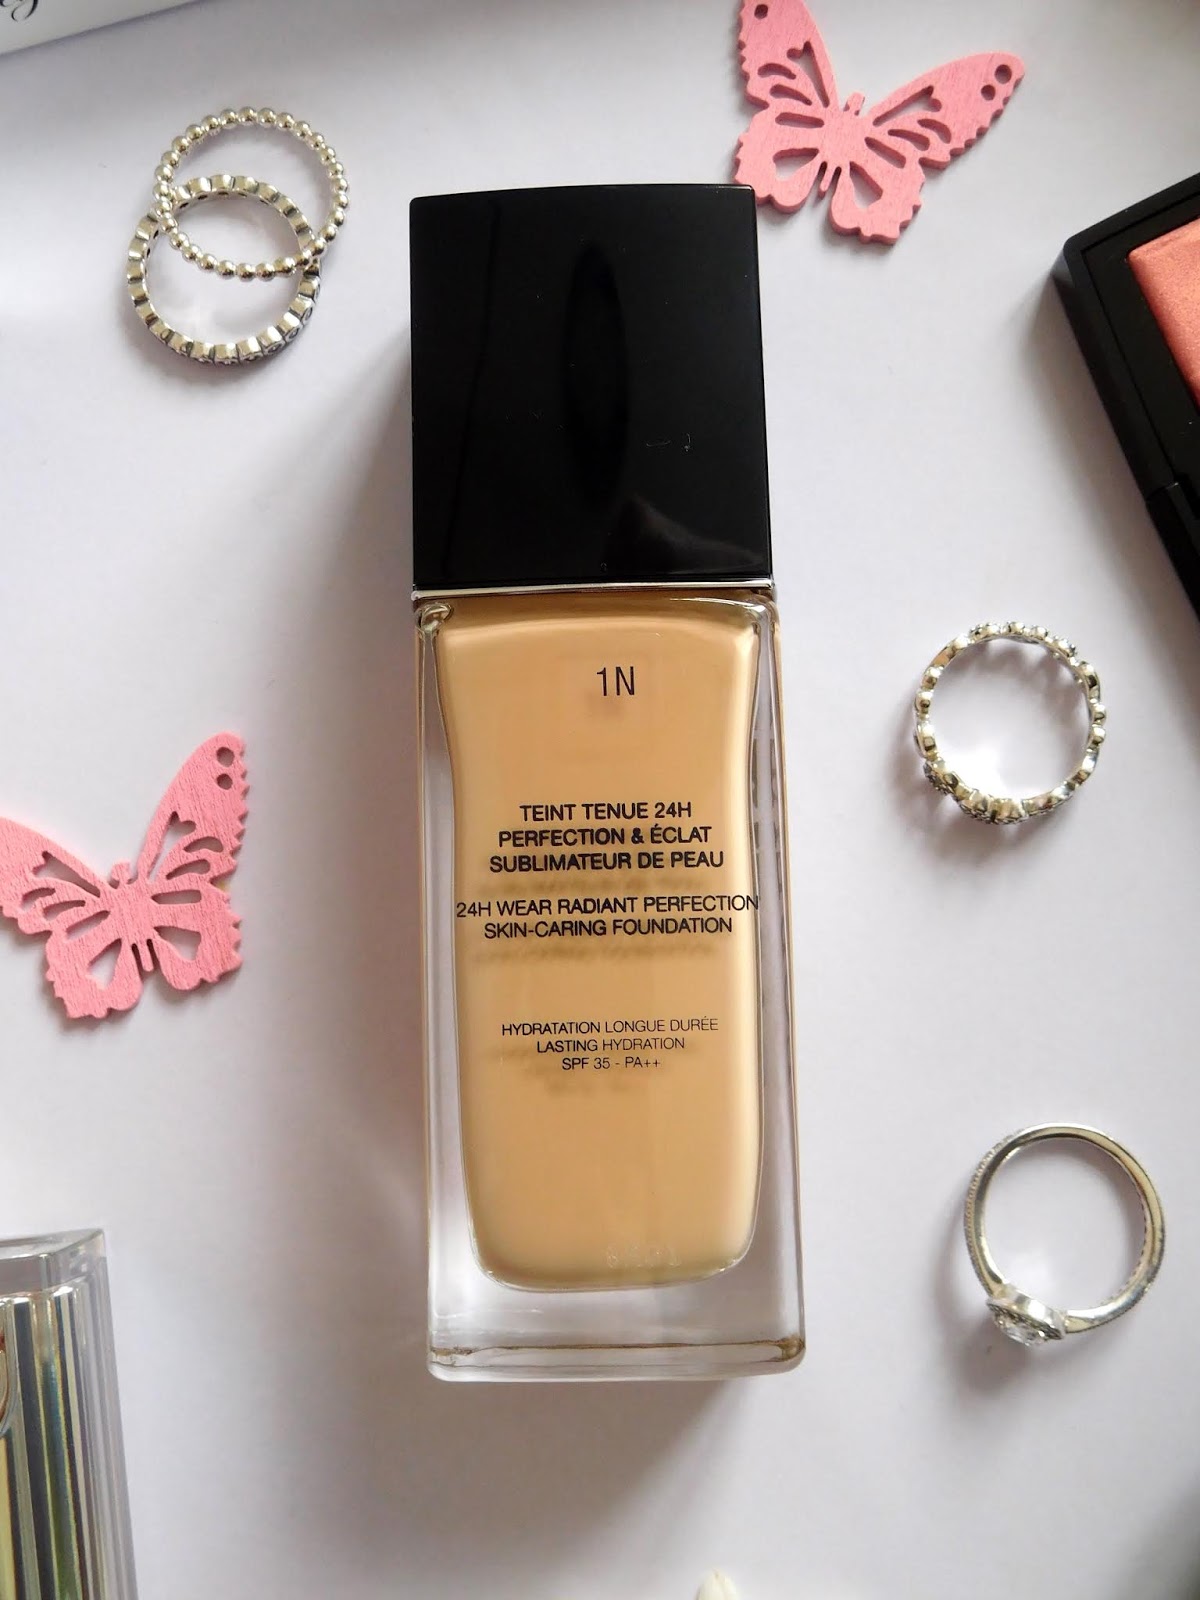 dior forever glow foundation